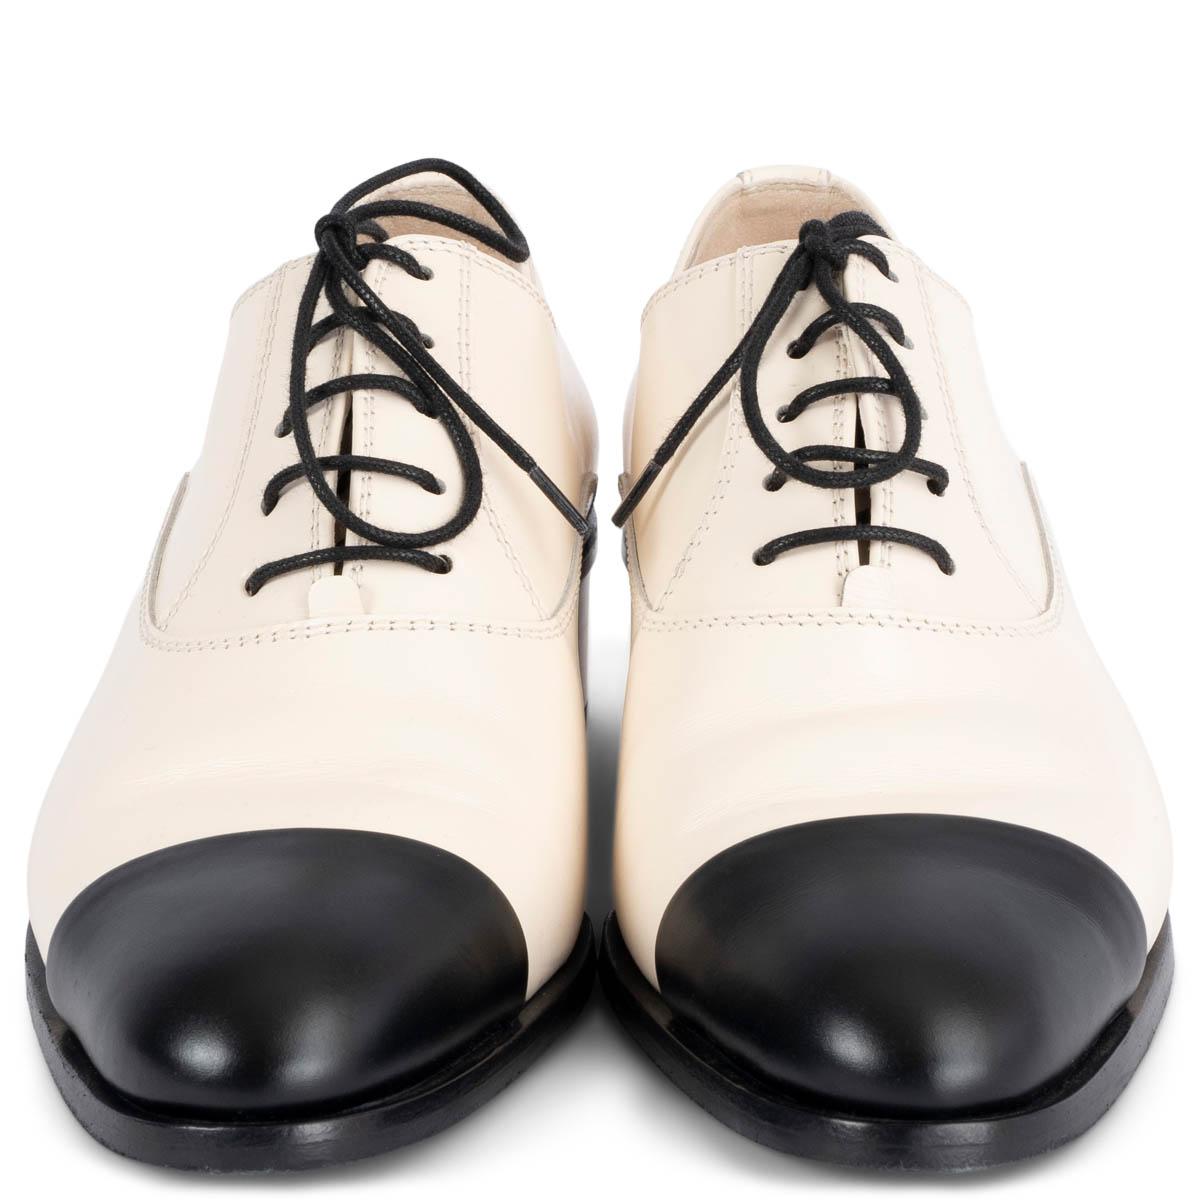 Chanel Lace Up Flats - 4 For Sale on 1stDibs